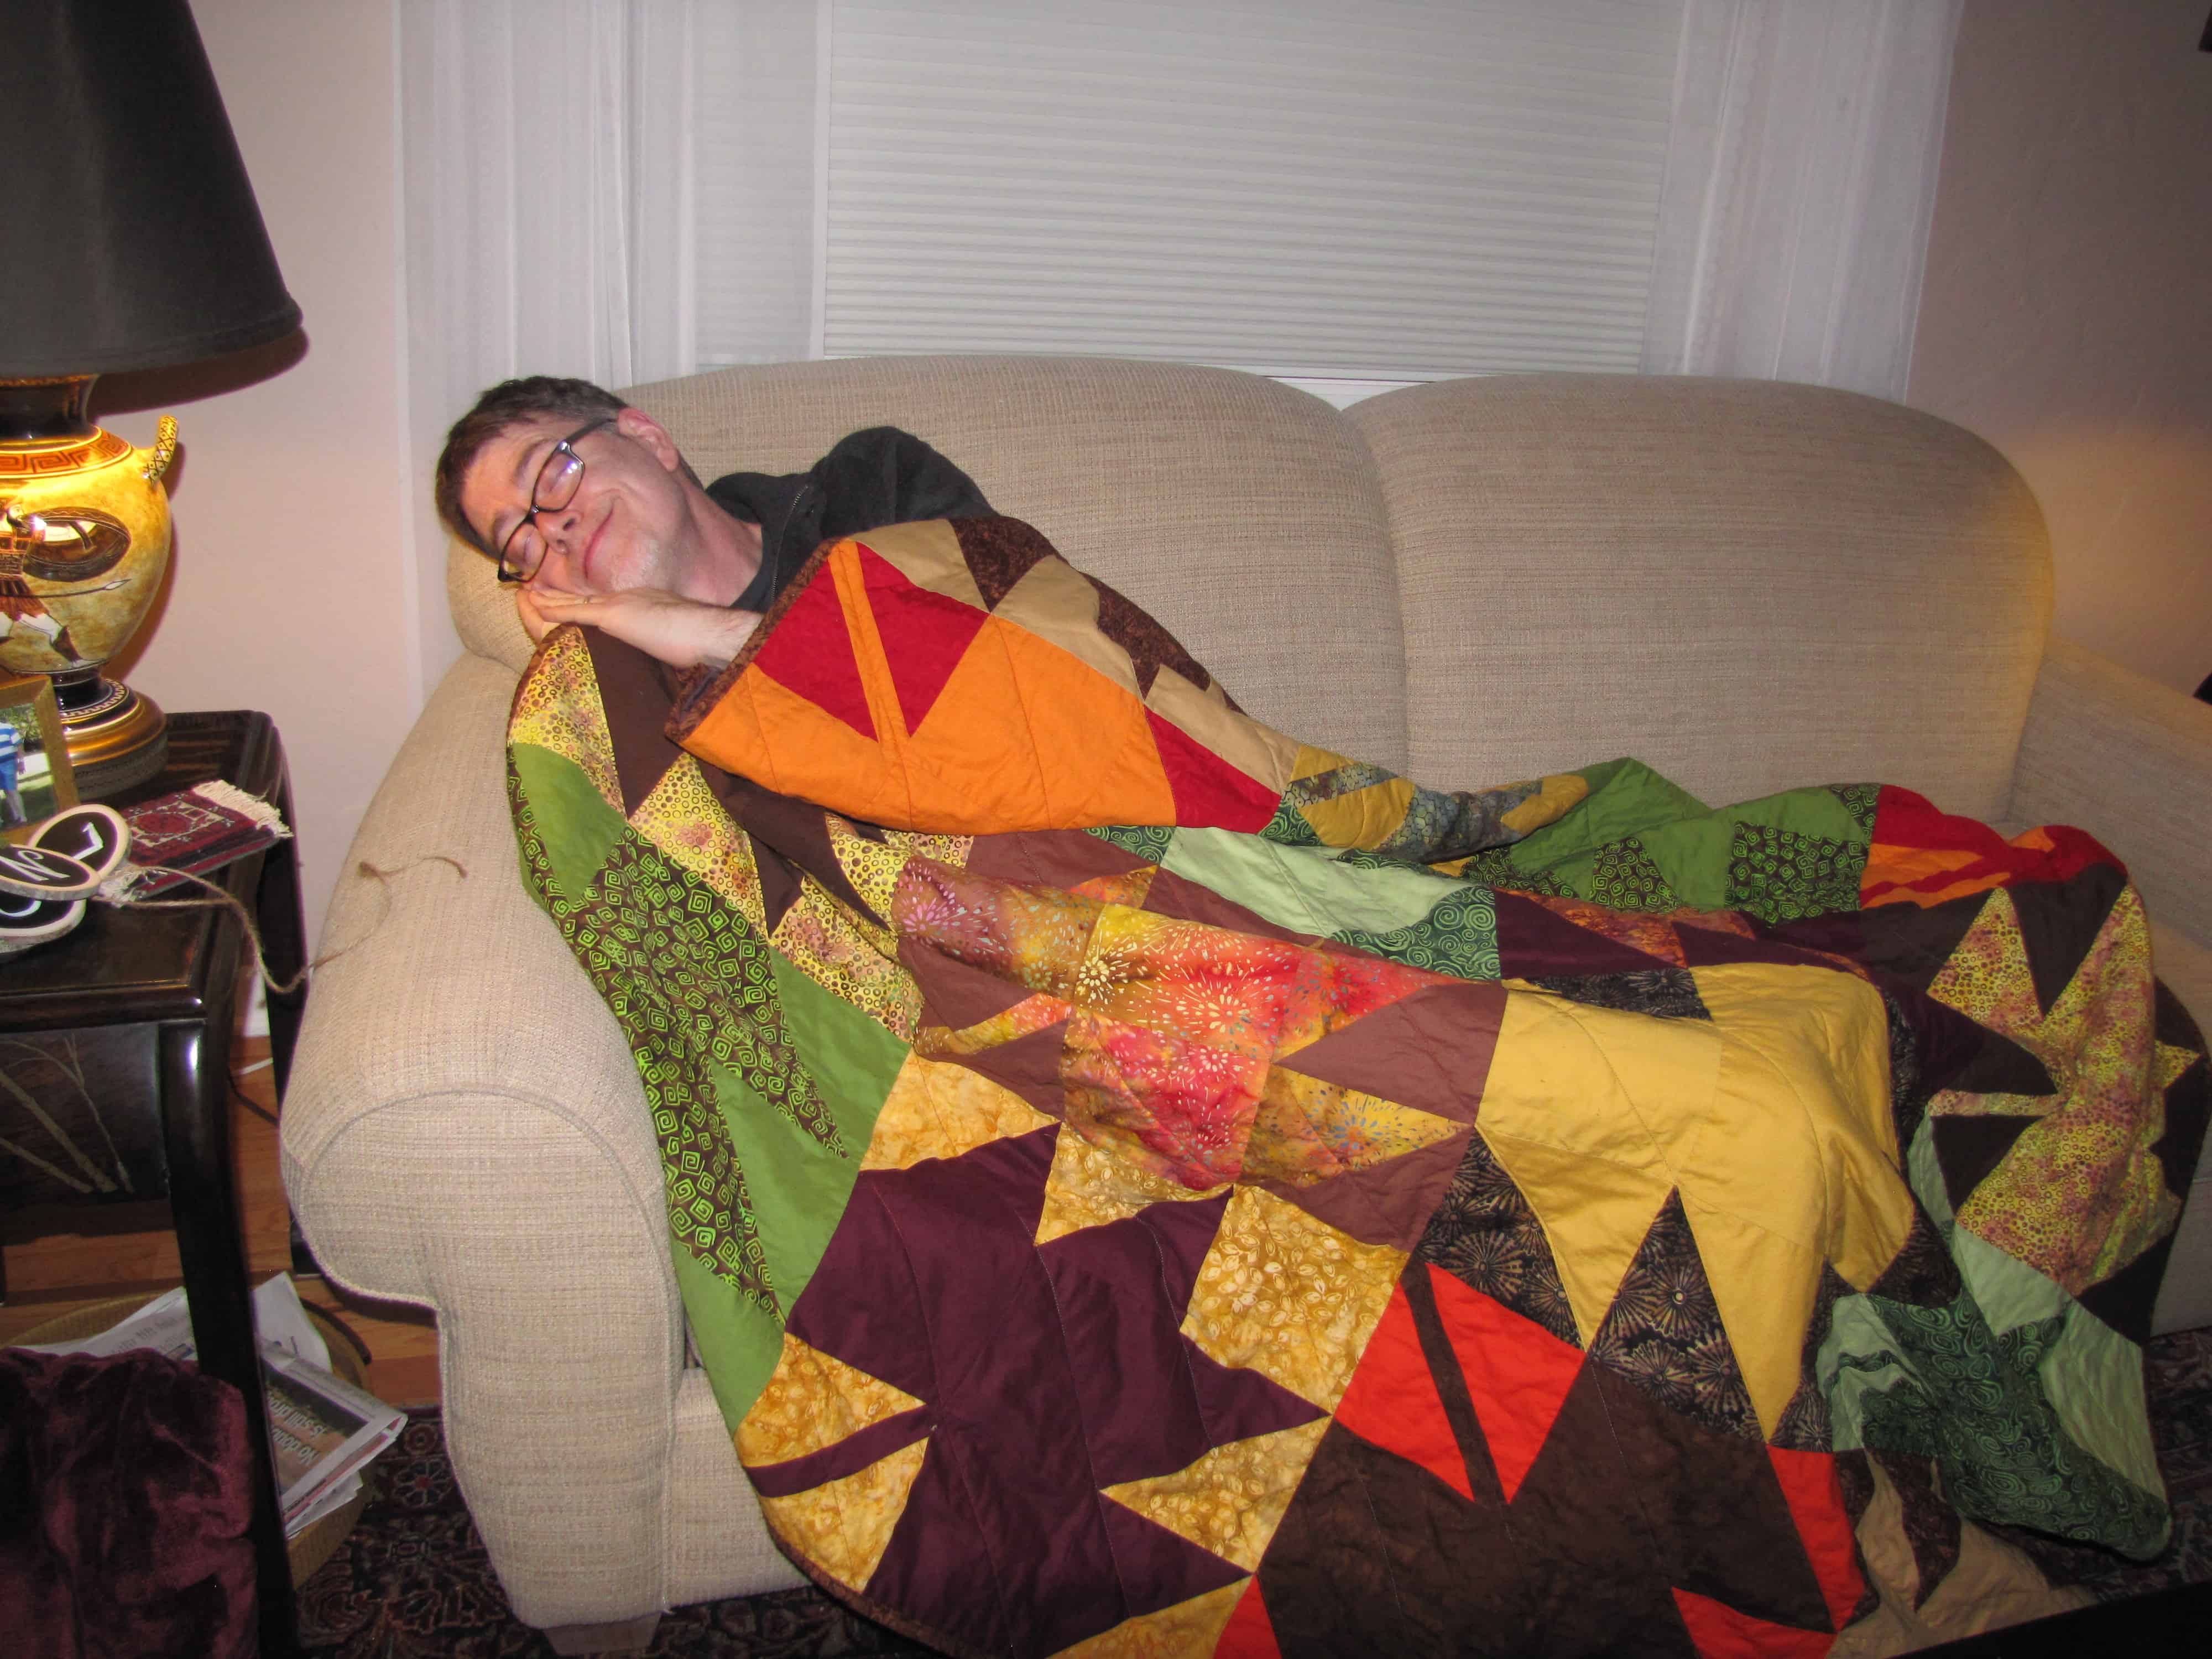 My brother, Mark, sleeping happily under his new quilt.